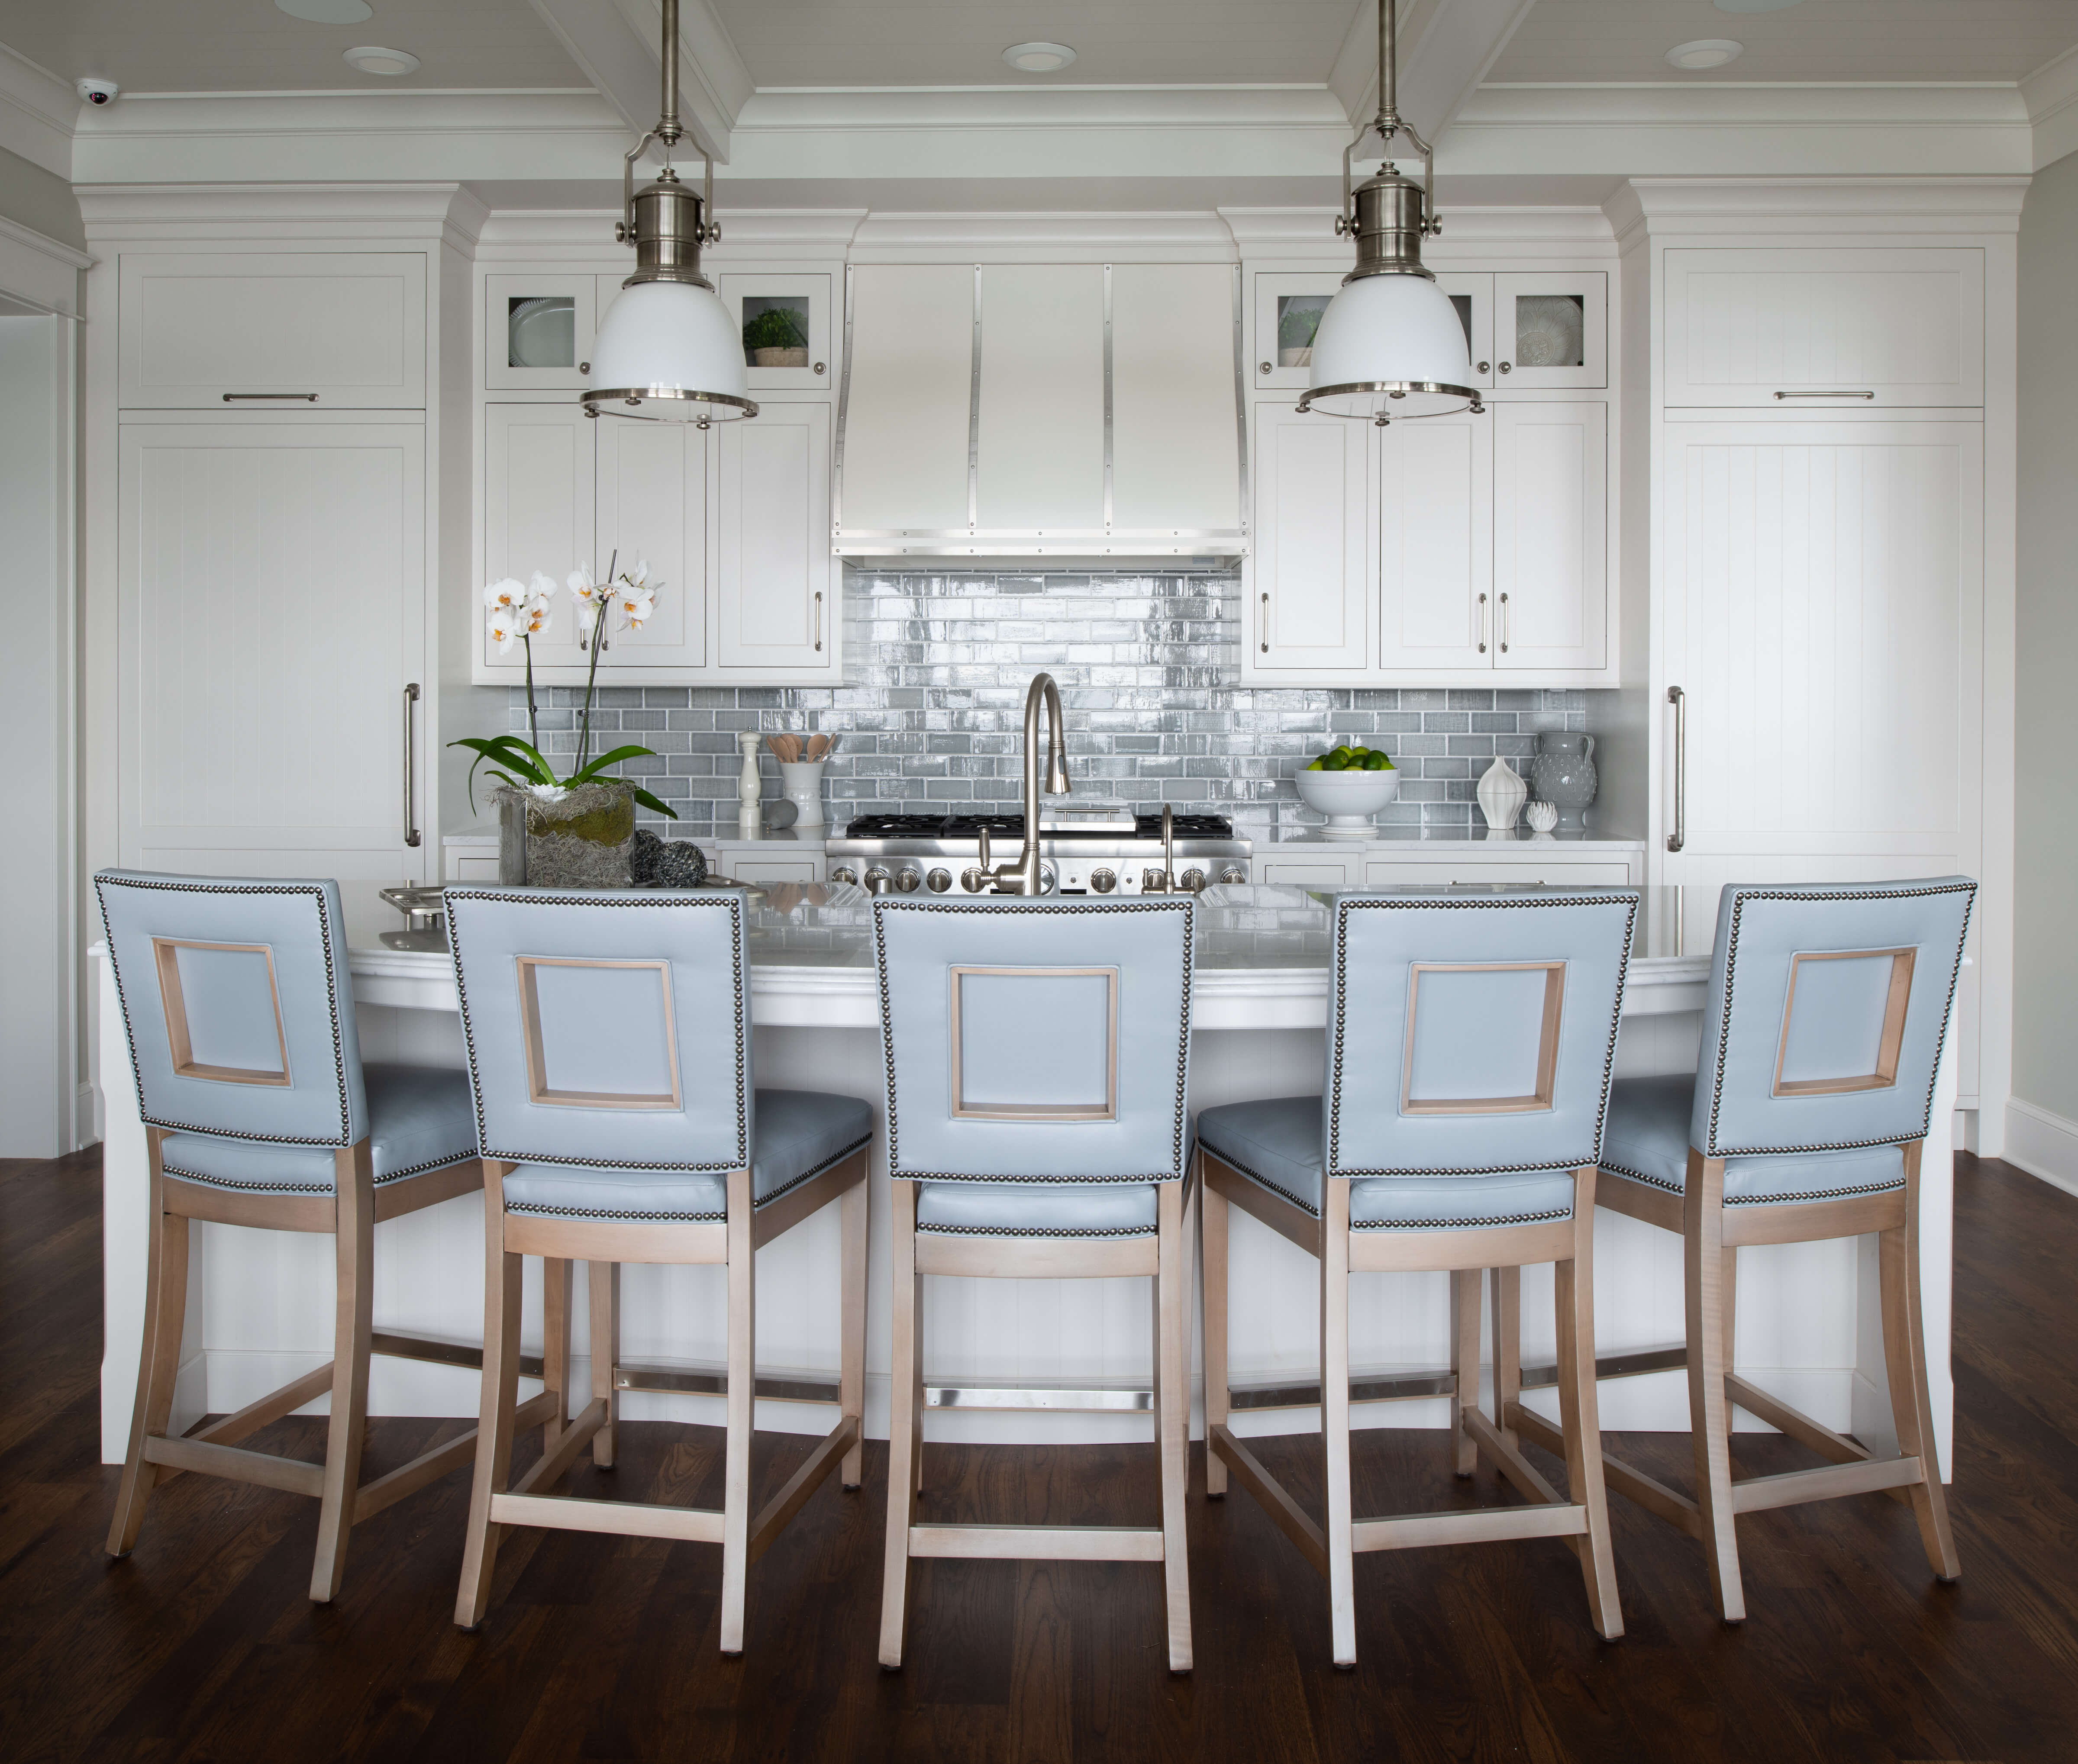 A symetrical kitchen design with an East Coast Shingle style using white inset cabinets, a light blue backsplash, pastel blue bar stools, and shiplap details.